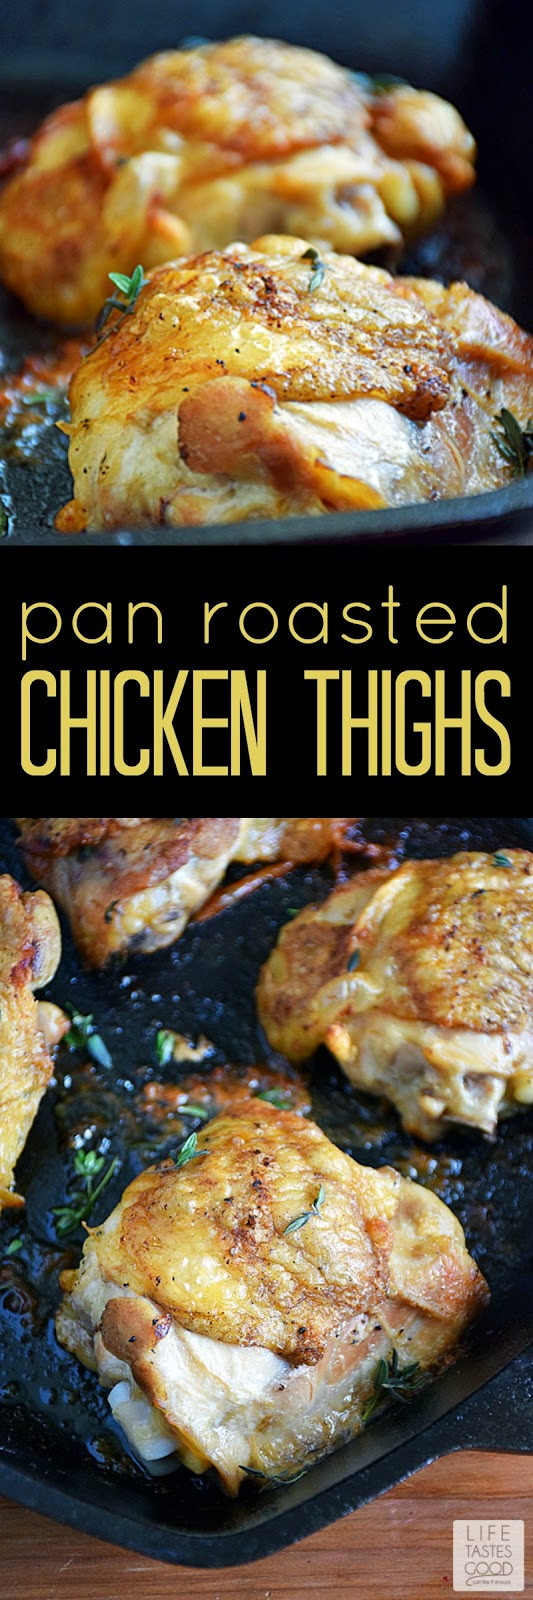 Pan Roasted Chicken Thighs
 Pan Roasted Chicken Thighs